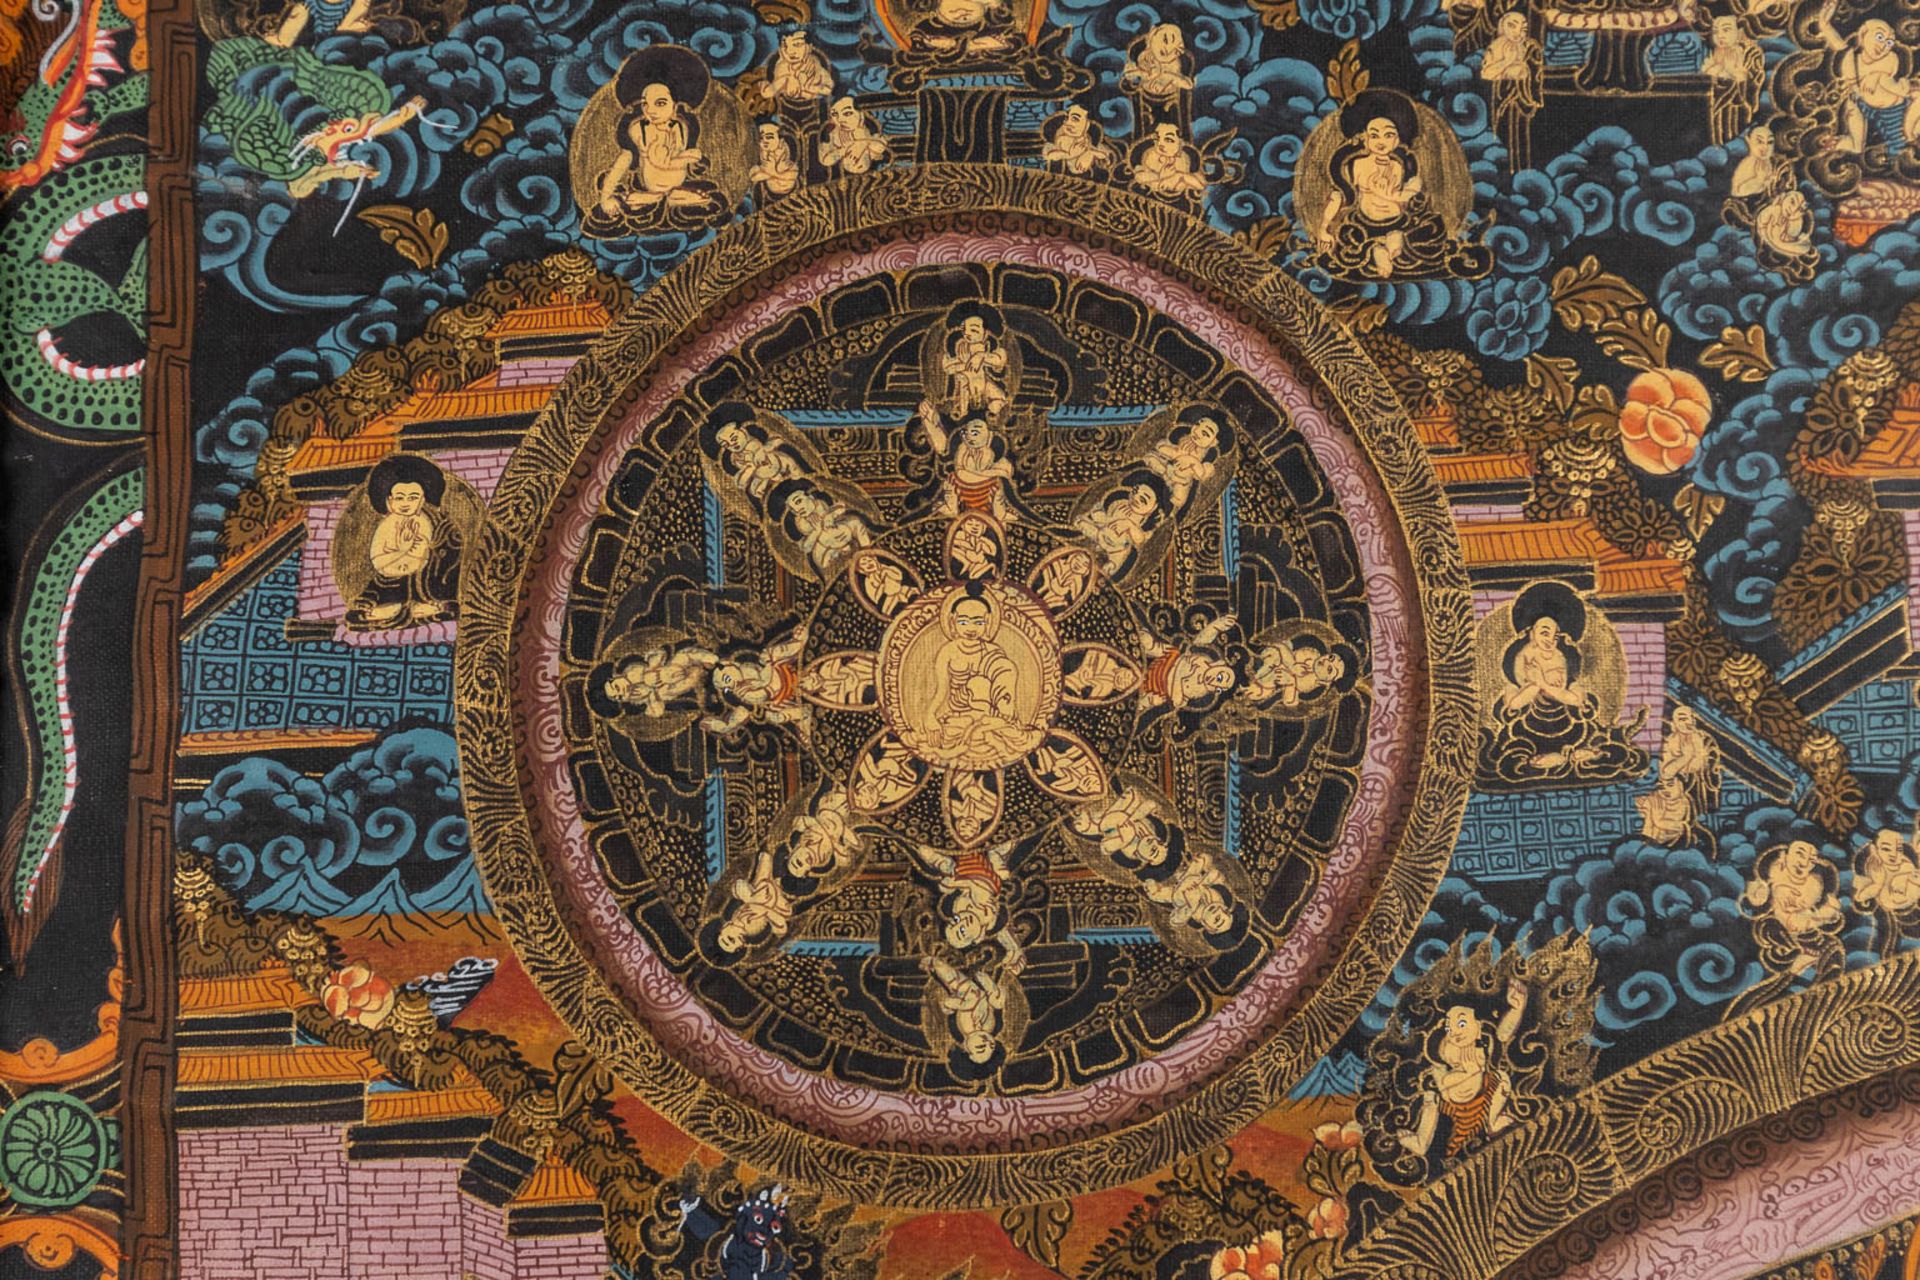 An Eastern Thangka, hand-painted decor on silk. (W:57 x H:74 cm) - Image 5 of 13